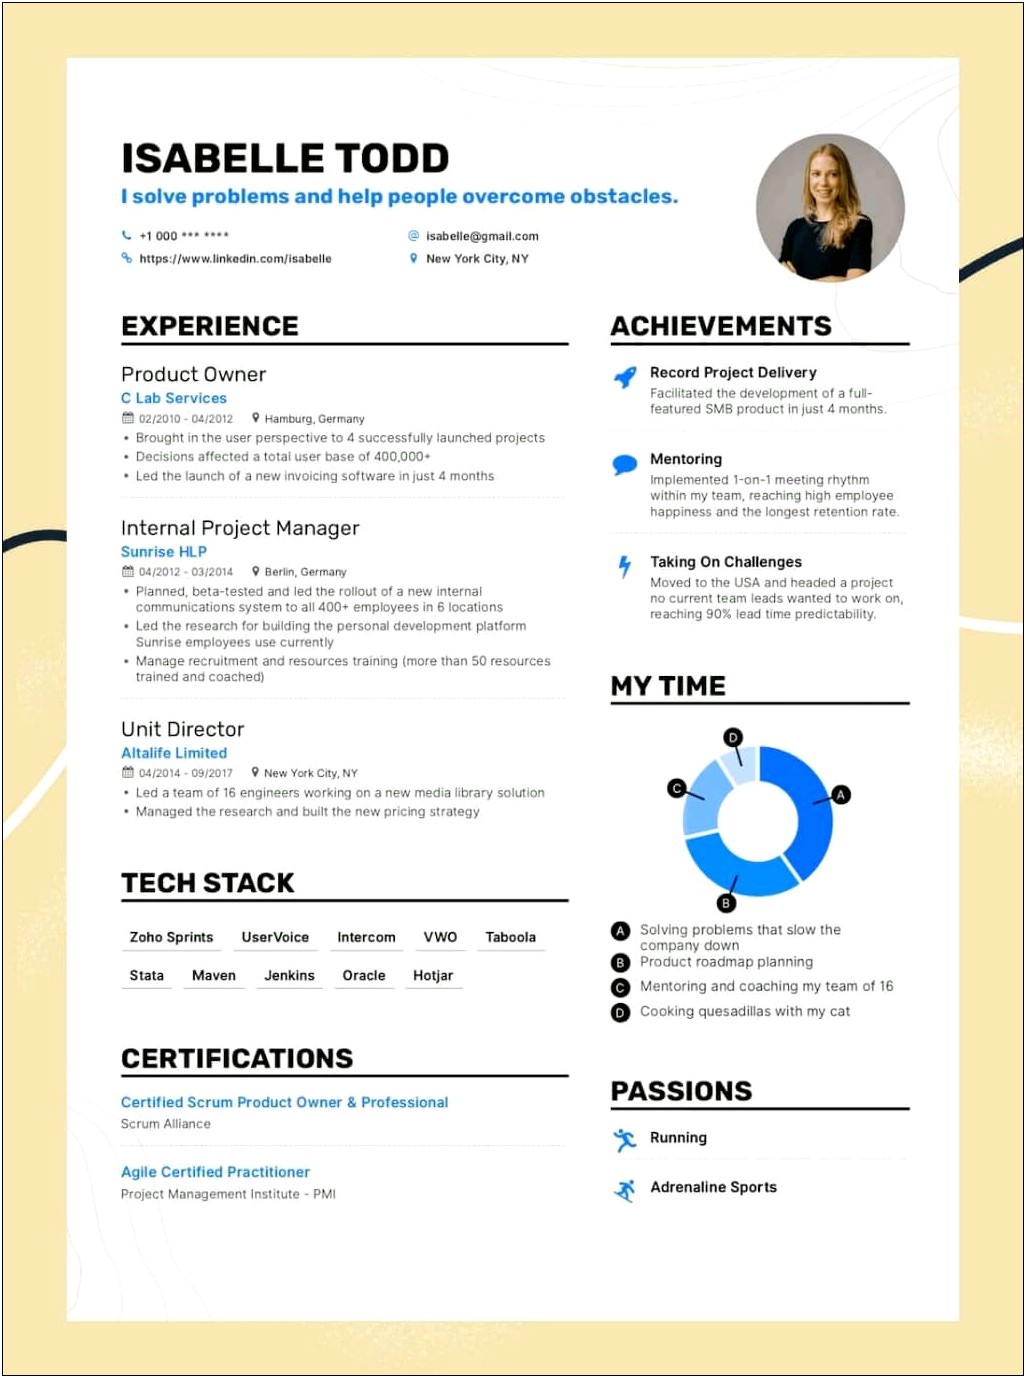 Good Traits To Incude In Resume